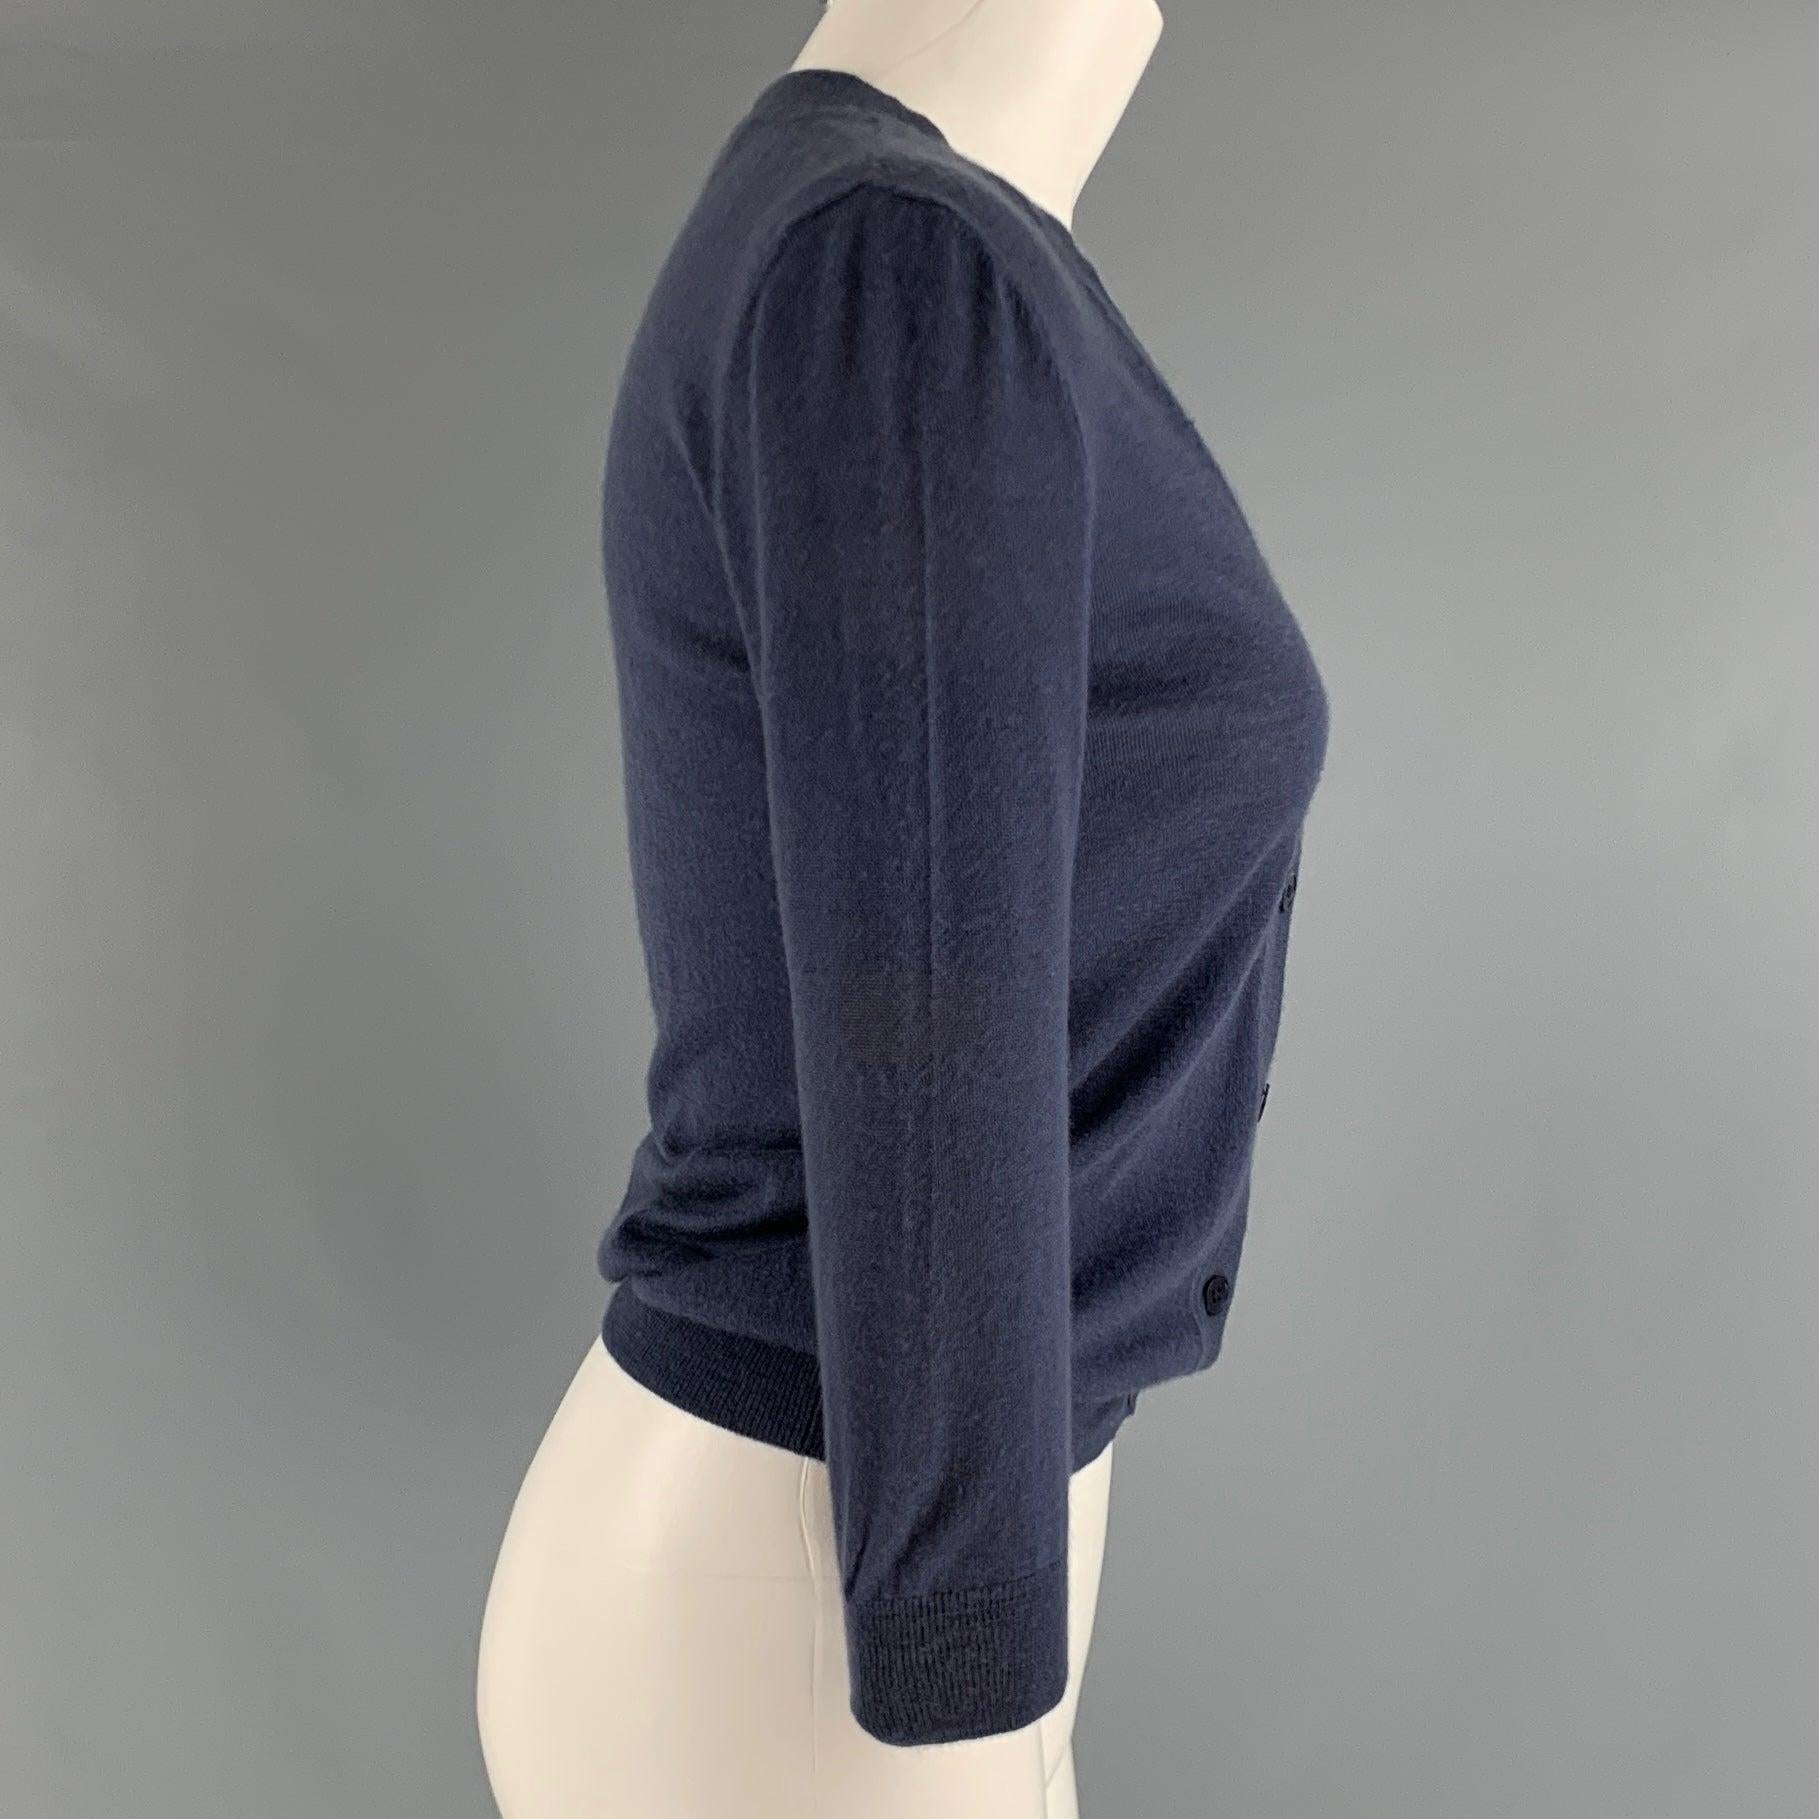 MARNI cardigan comes in a blue cashmere knitted material featuring 3/4 sleeves, v-neck, and a buttoned closure. Made in ItalyExcellent Pre-Owned Condition. 

Marked:   2 

Measurements: 
 
Shoulder: 15.5 inches Bust: 34 inches Sleeve: 18 inches